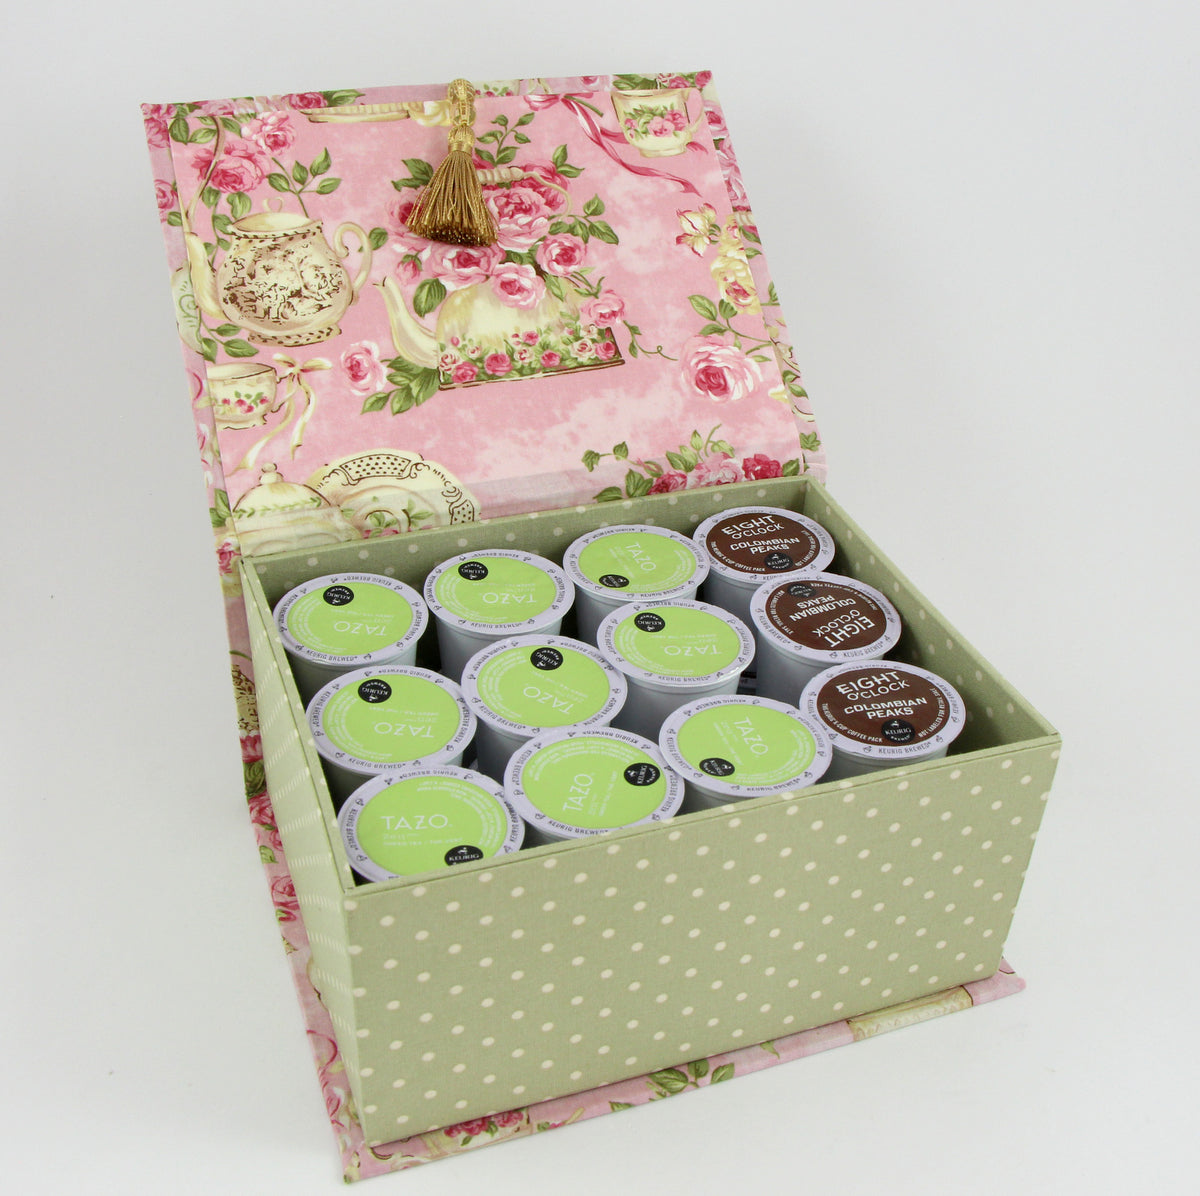 Fabric k-cup box DIY kit, cartonnage kit 143, online instructions included - Colorway Arts